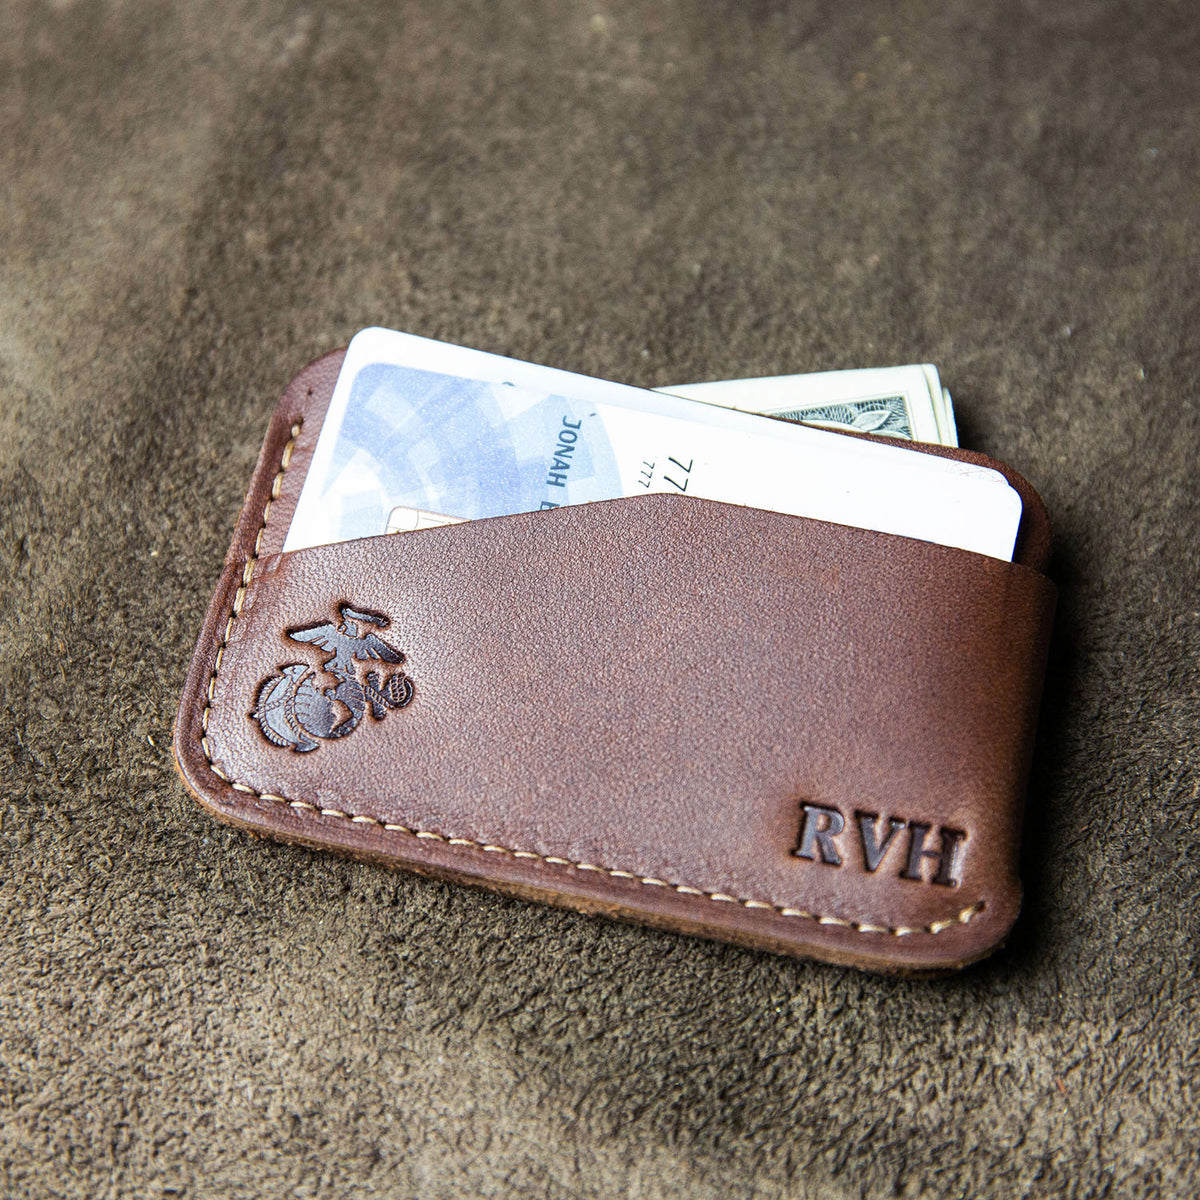 Fine leather triple sleeve front pocket wallet with personalized initials and Marine Corps logo